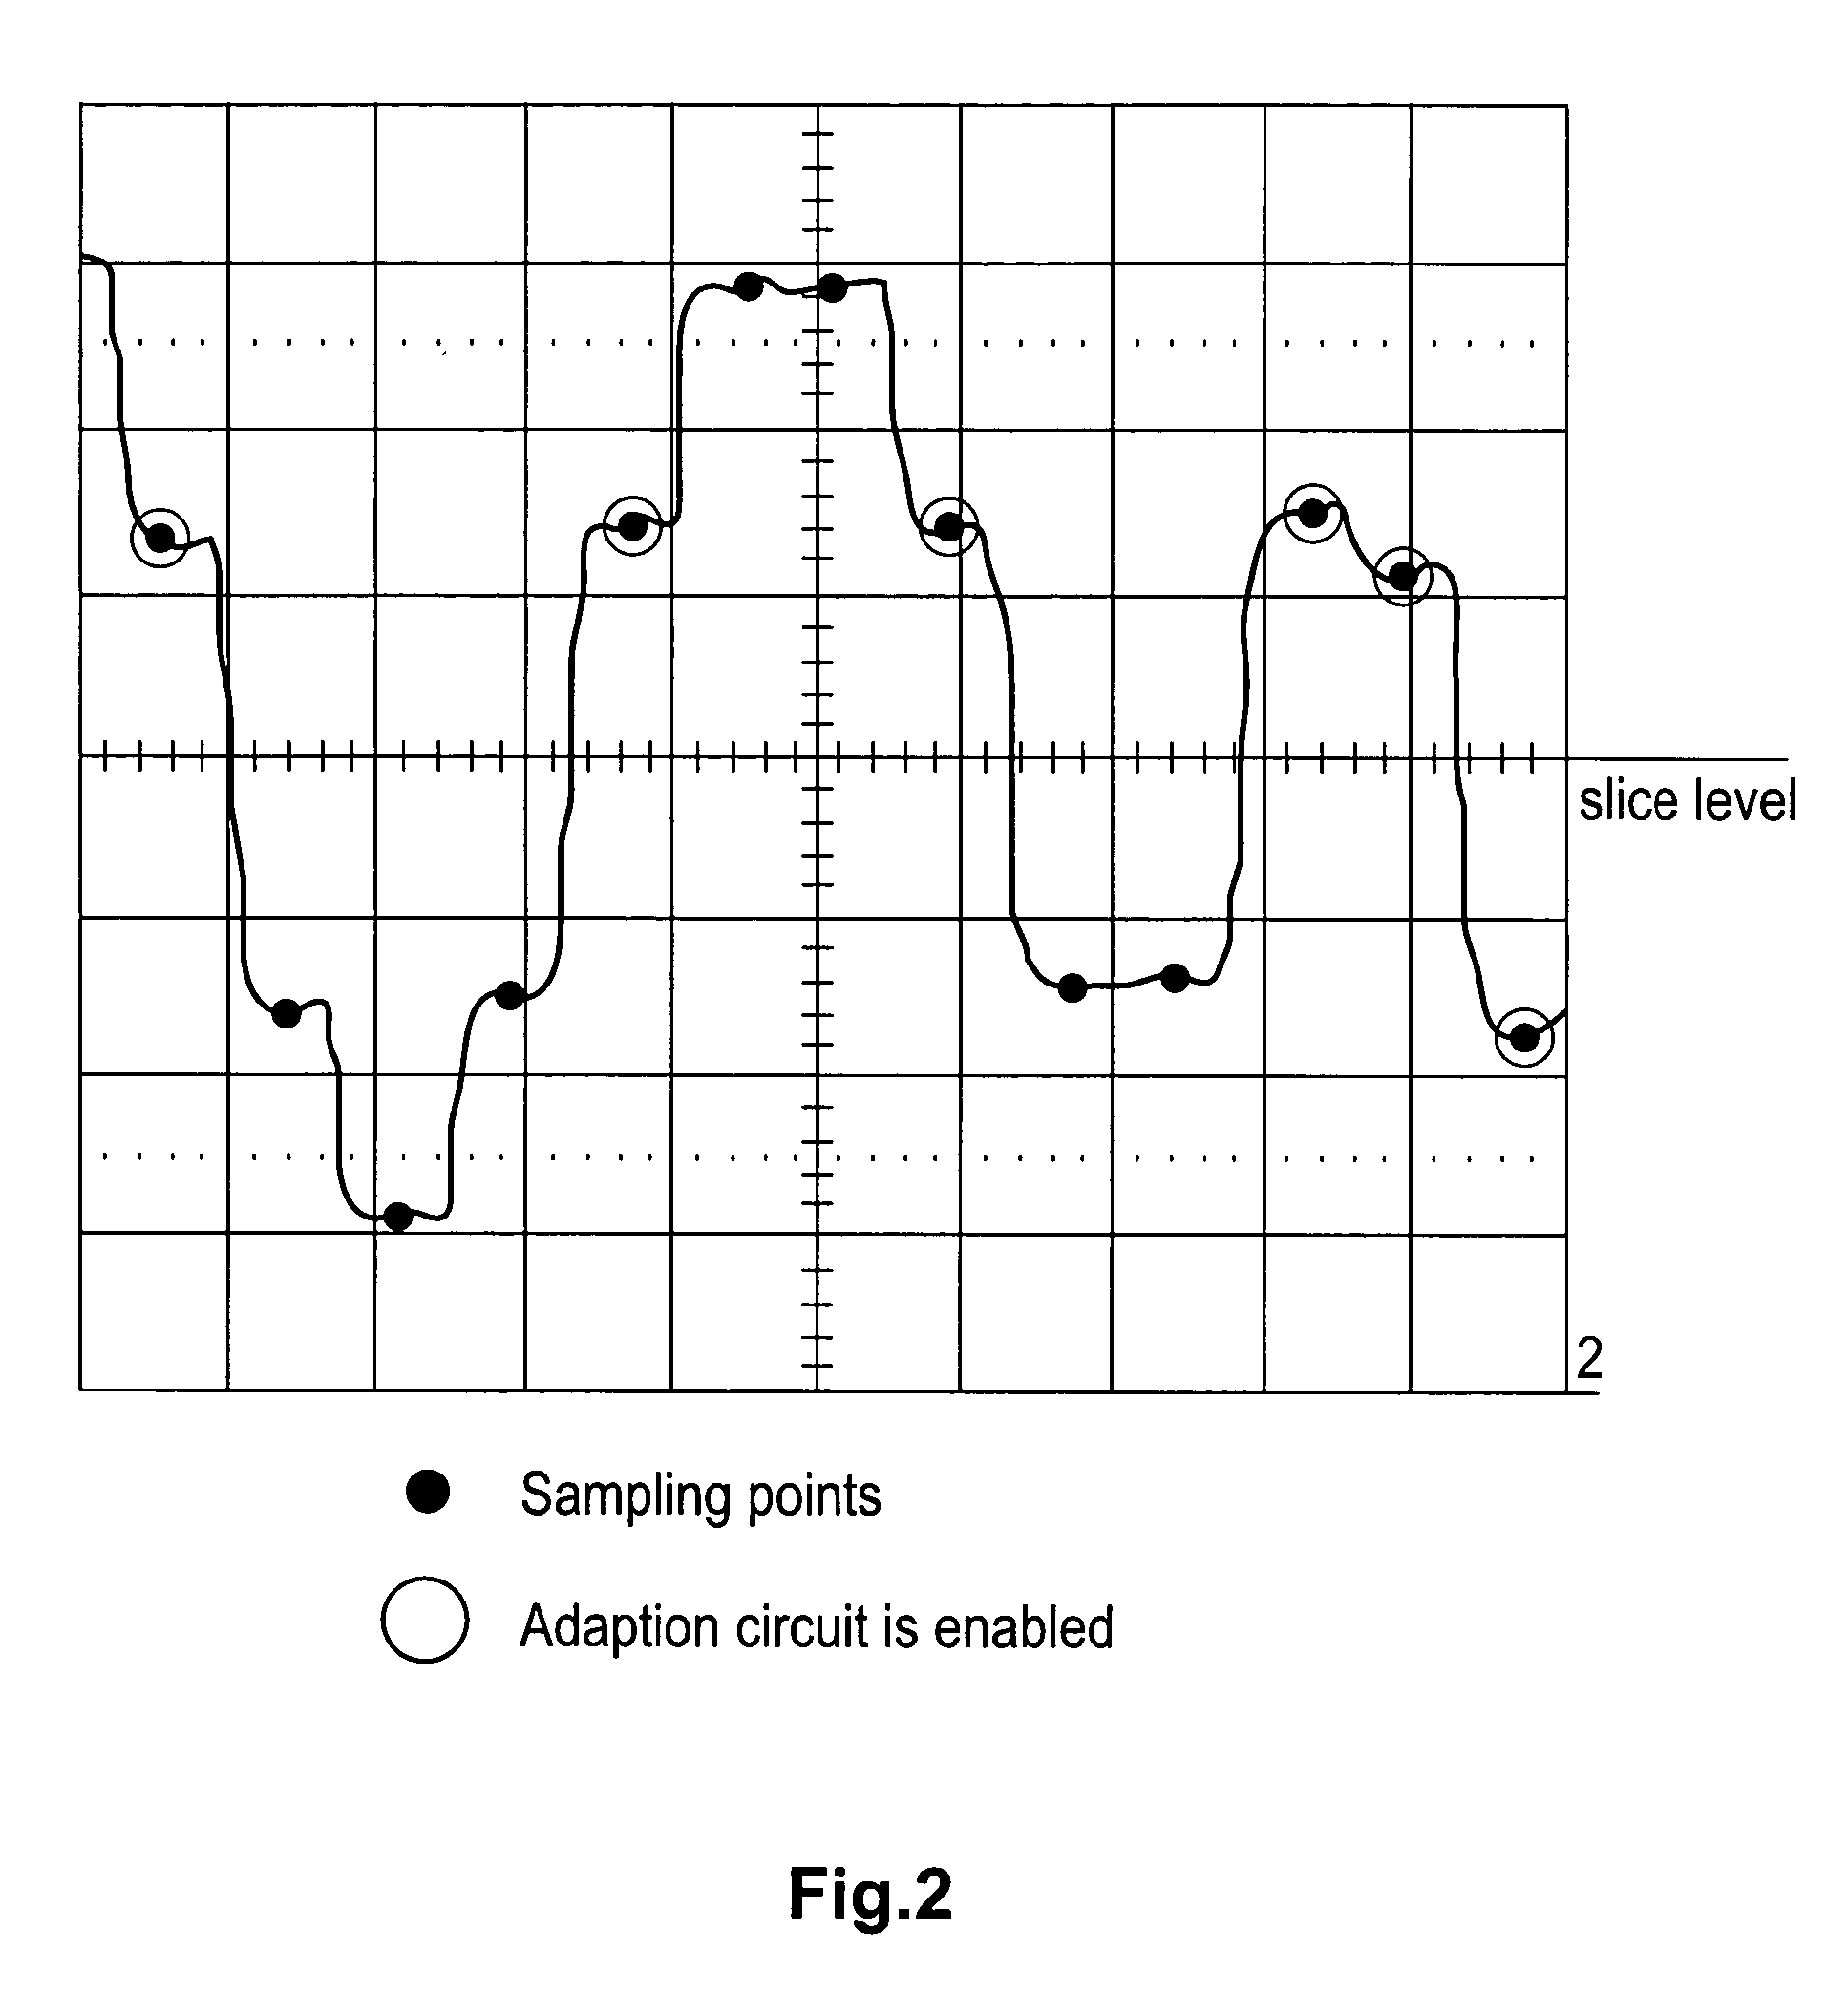 Electronic circuit for decoding a read signal from an optical storage medium